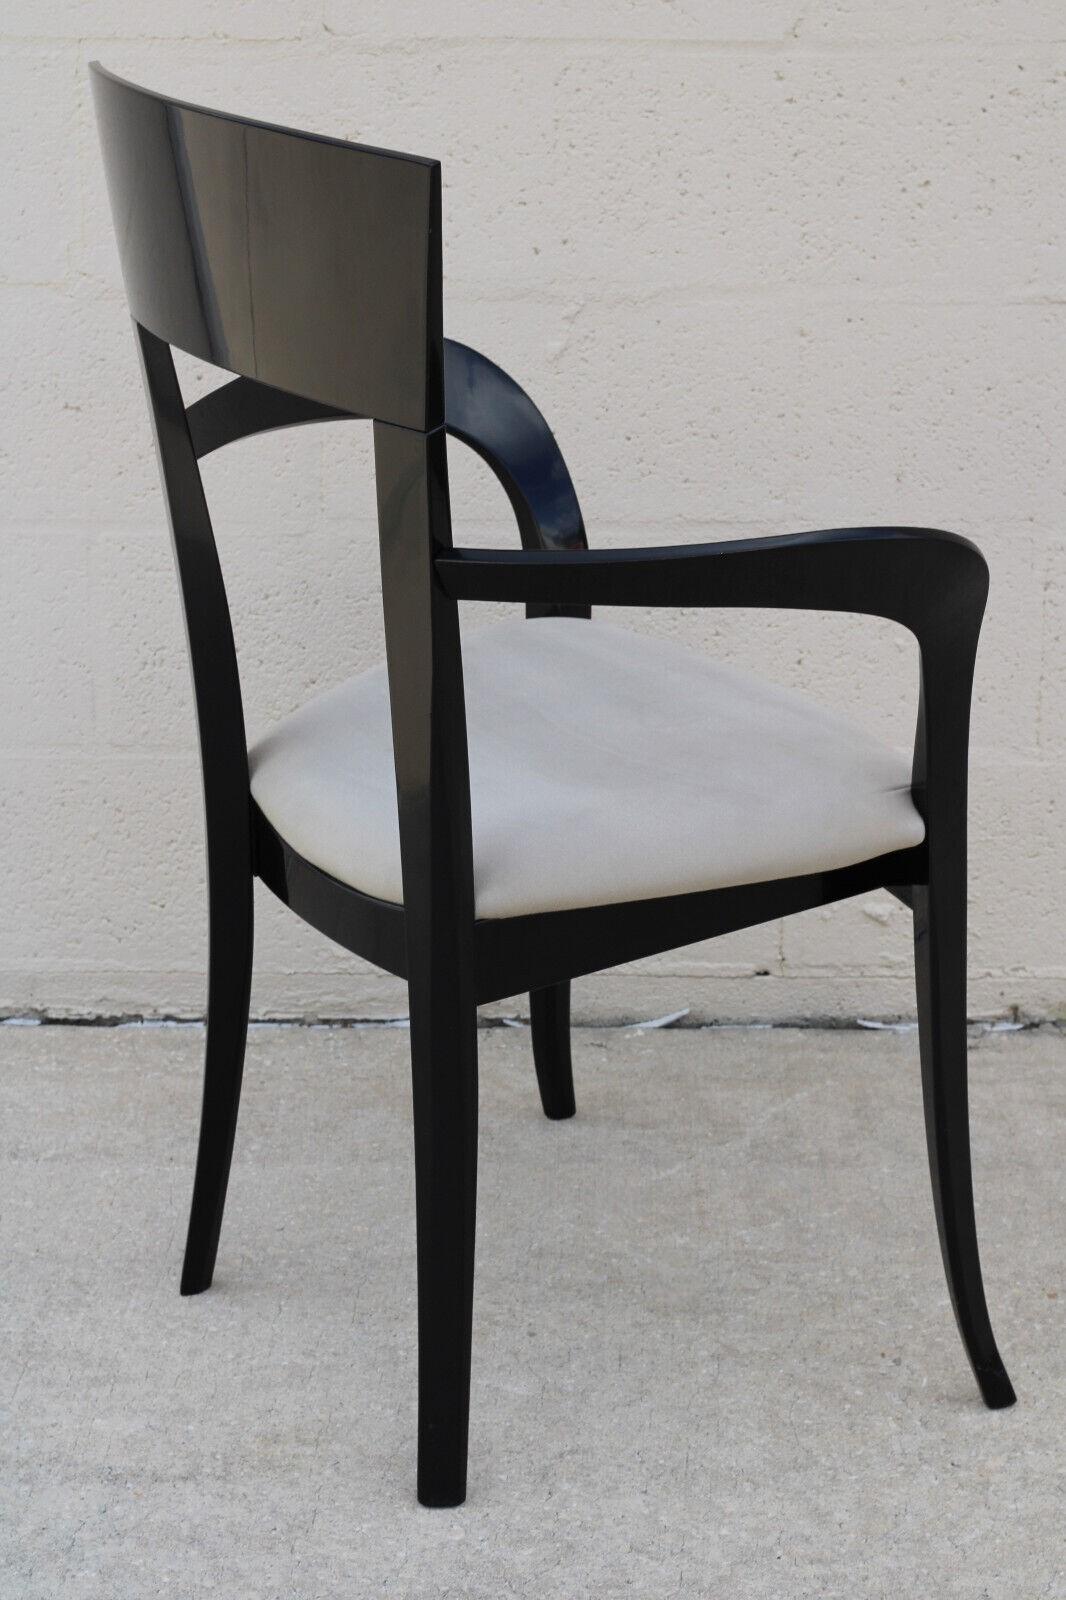 Eight Sculptural Black Lacquer Dining Chairs by Pietro Costantini, Made in Italy In Good Condition For Sale In Vero Beach, FL